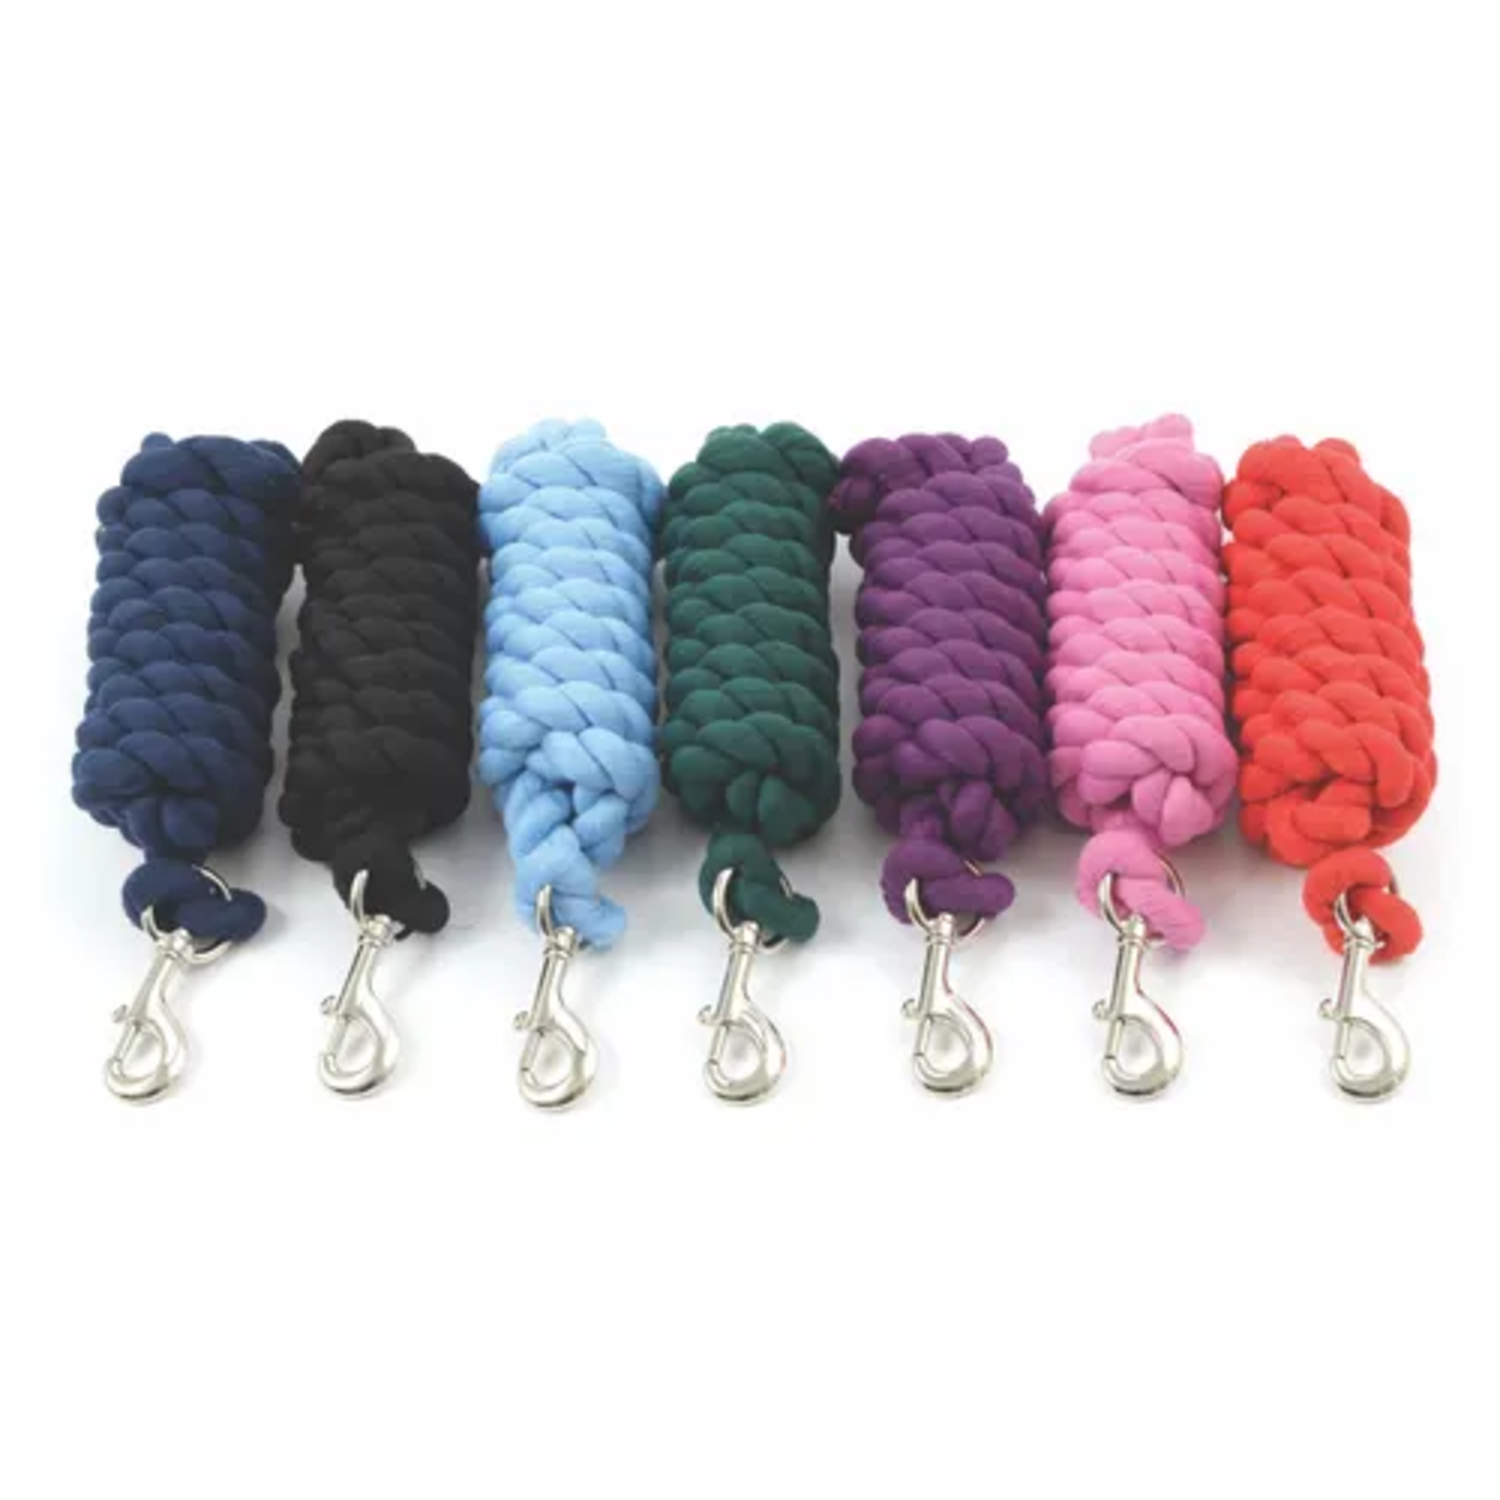 SHIRES 8' COTTON LEAD ROPE